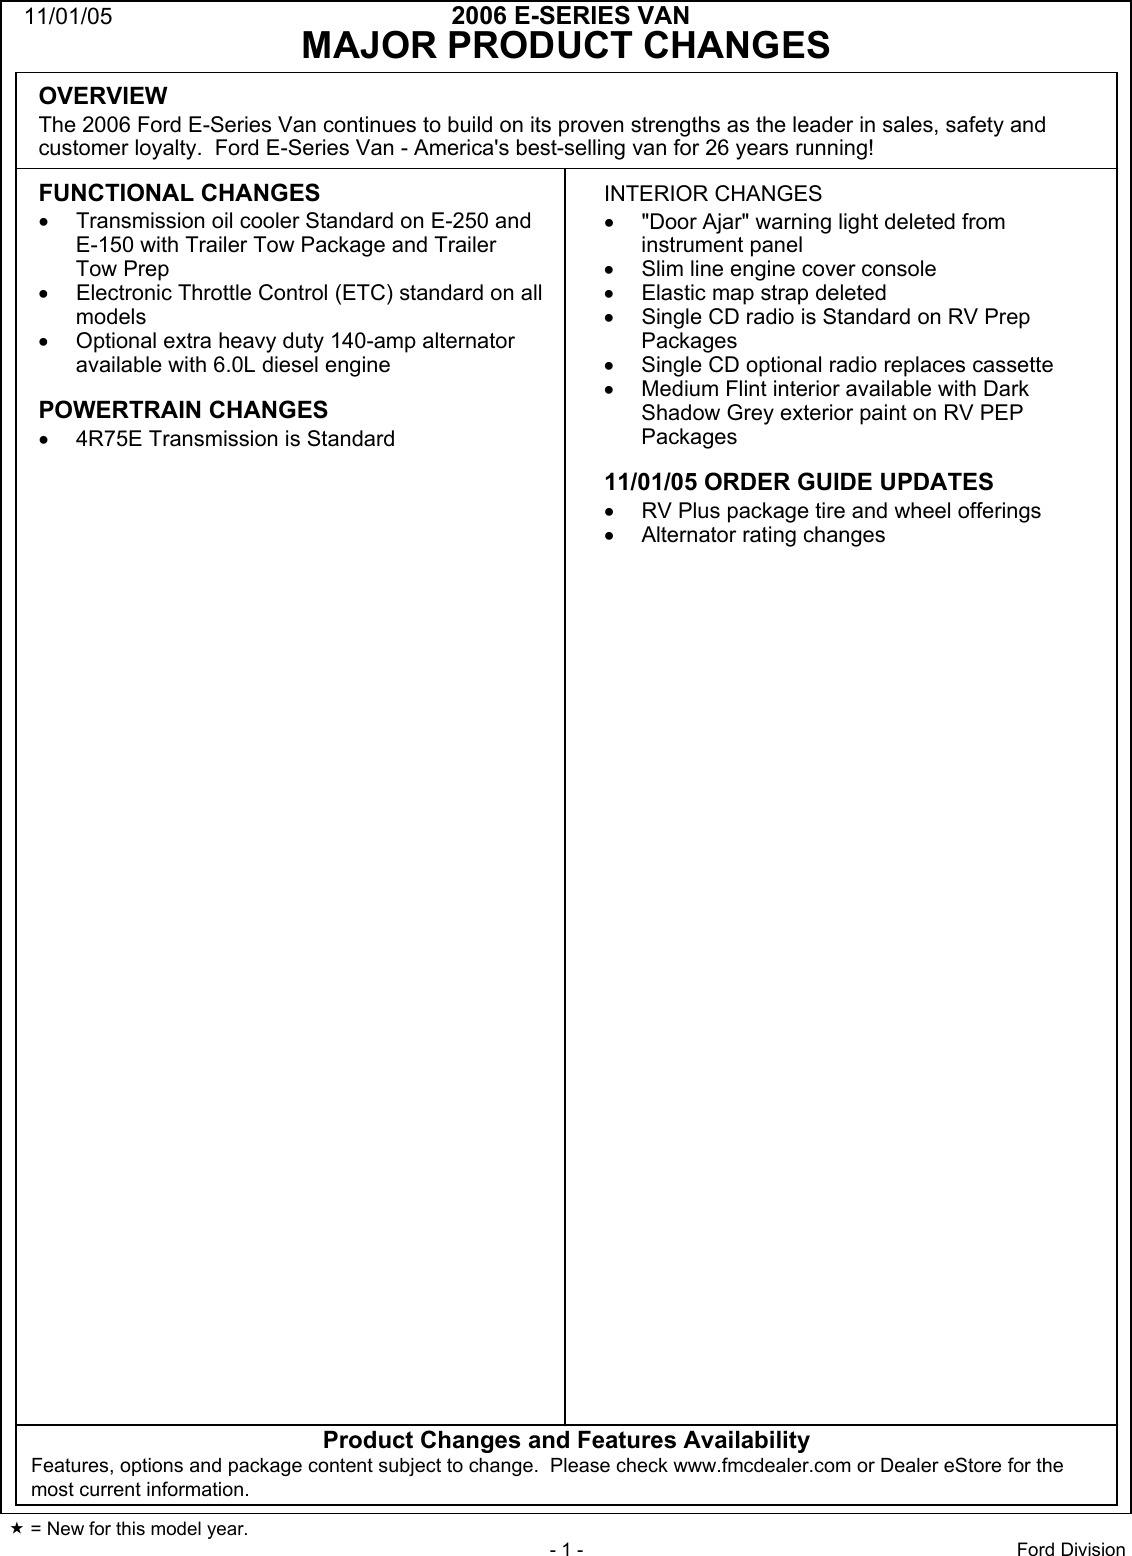 Page 1 of 12 - Ford Ford-2006-E-Series-Specification-Sheet 68xE-Series VanCom